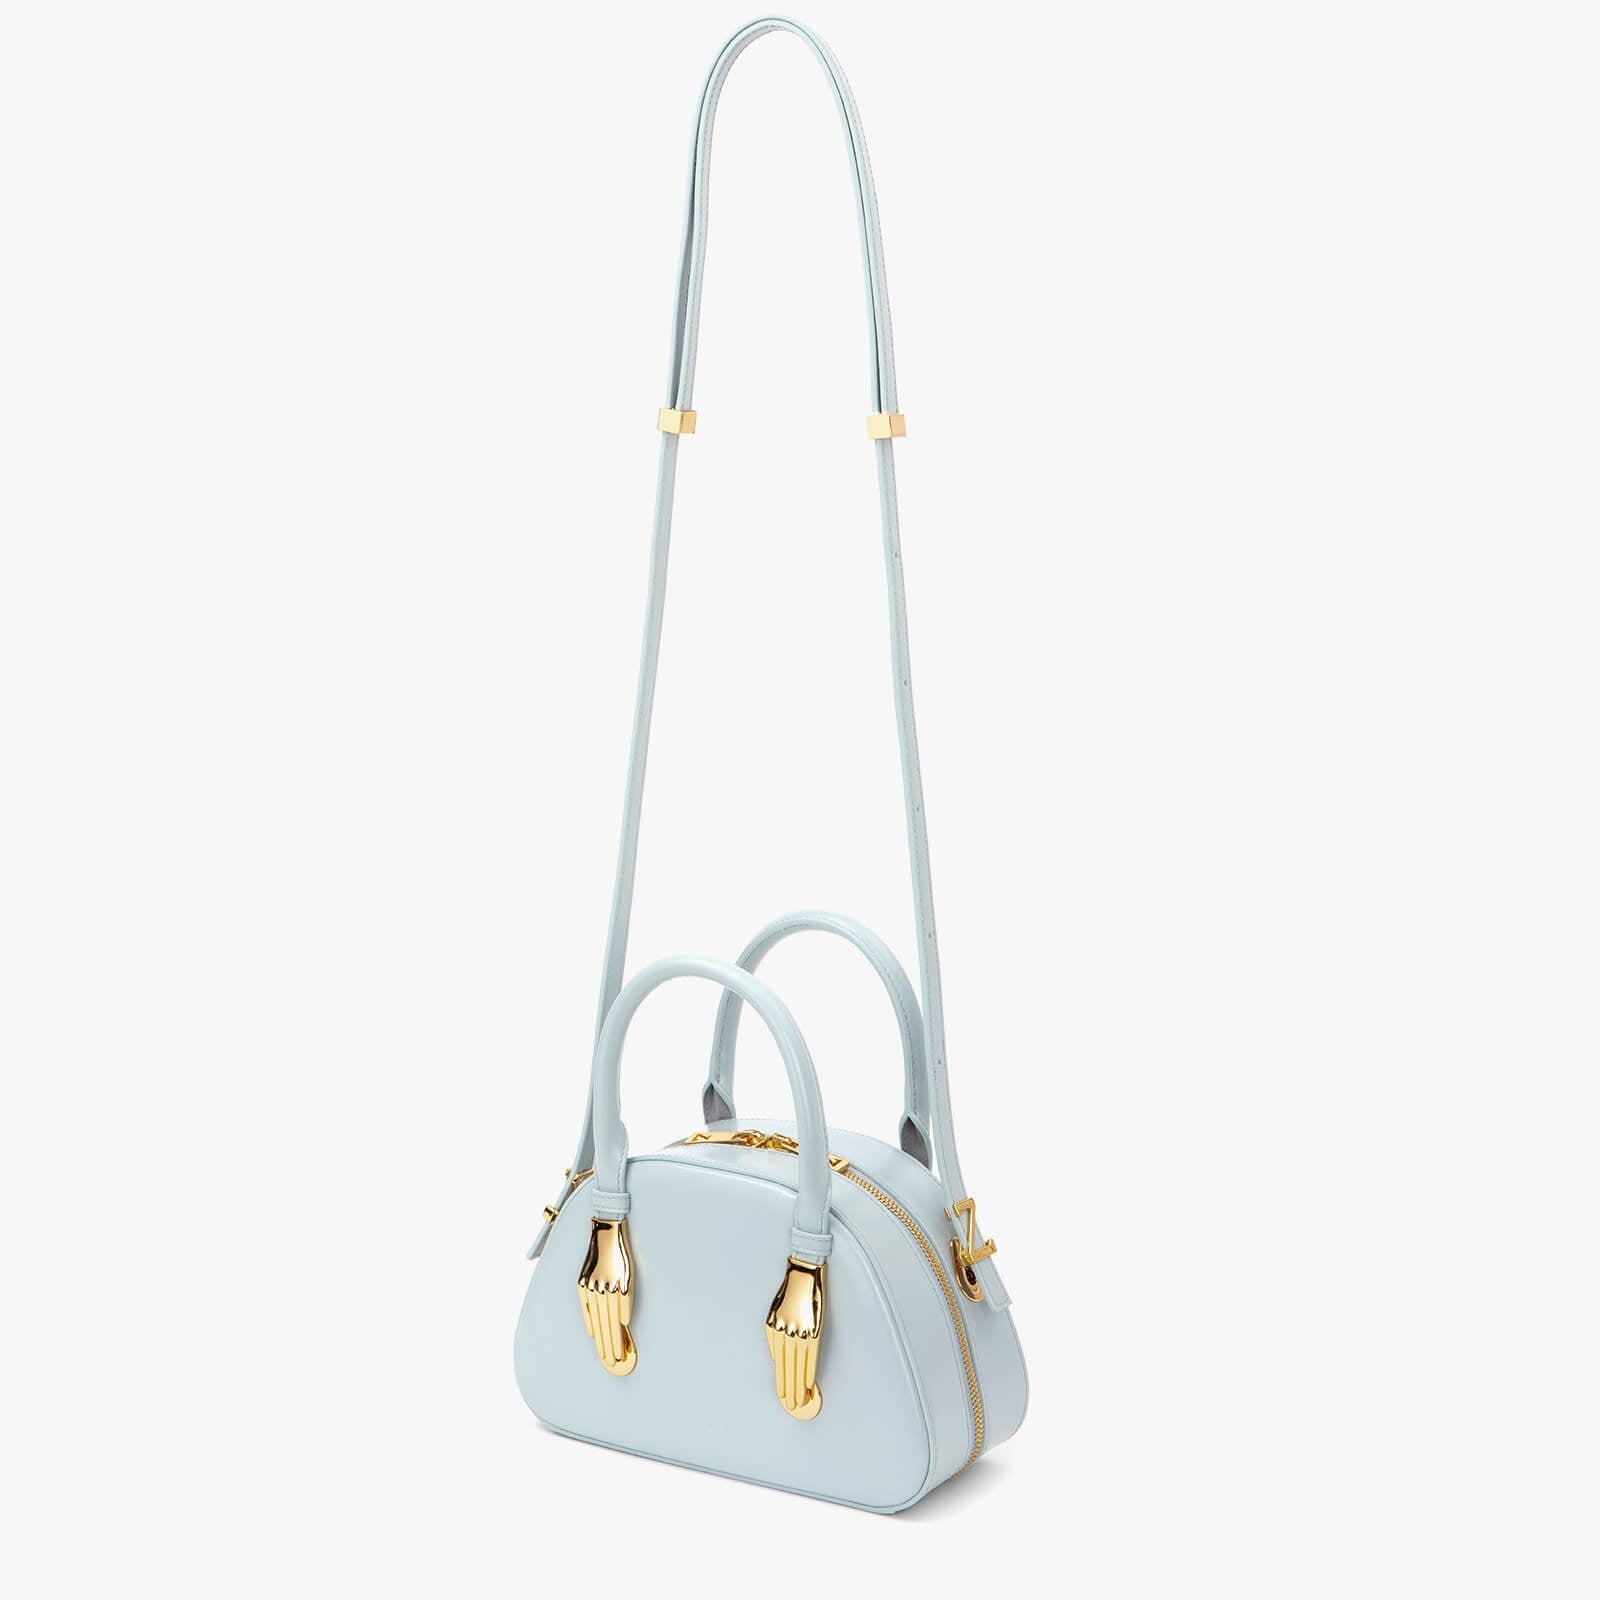 Shell Top handle blue women's leather bag